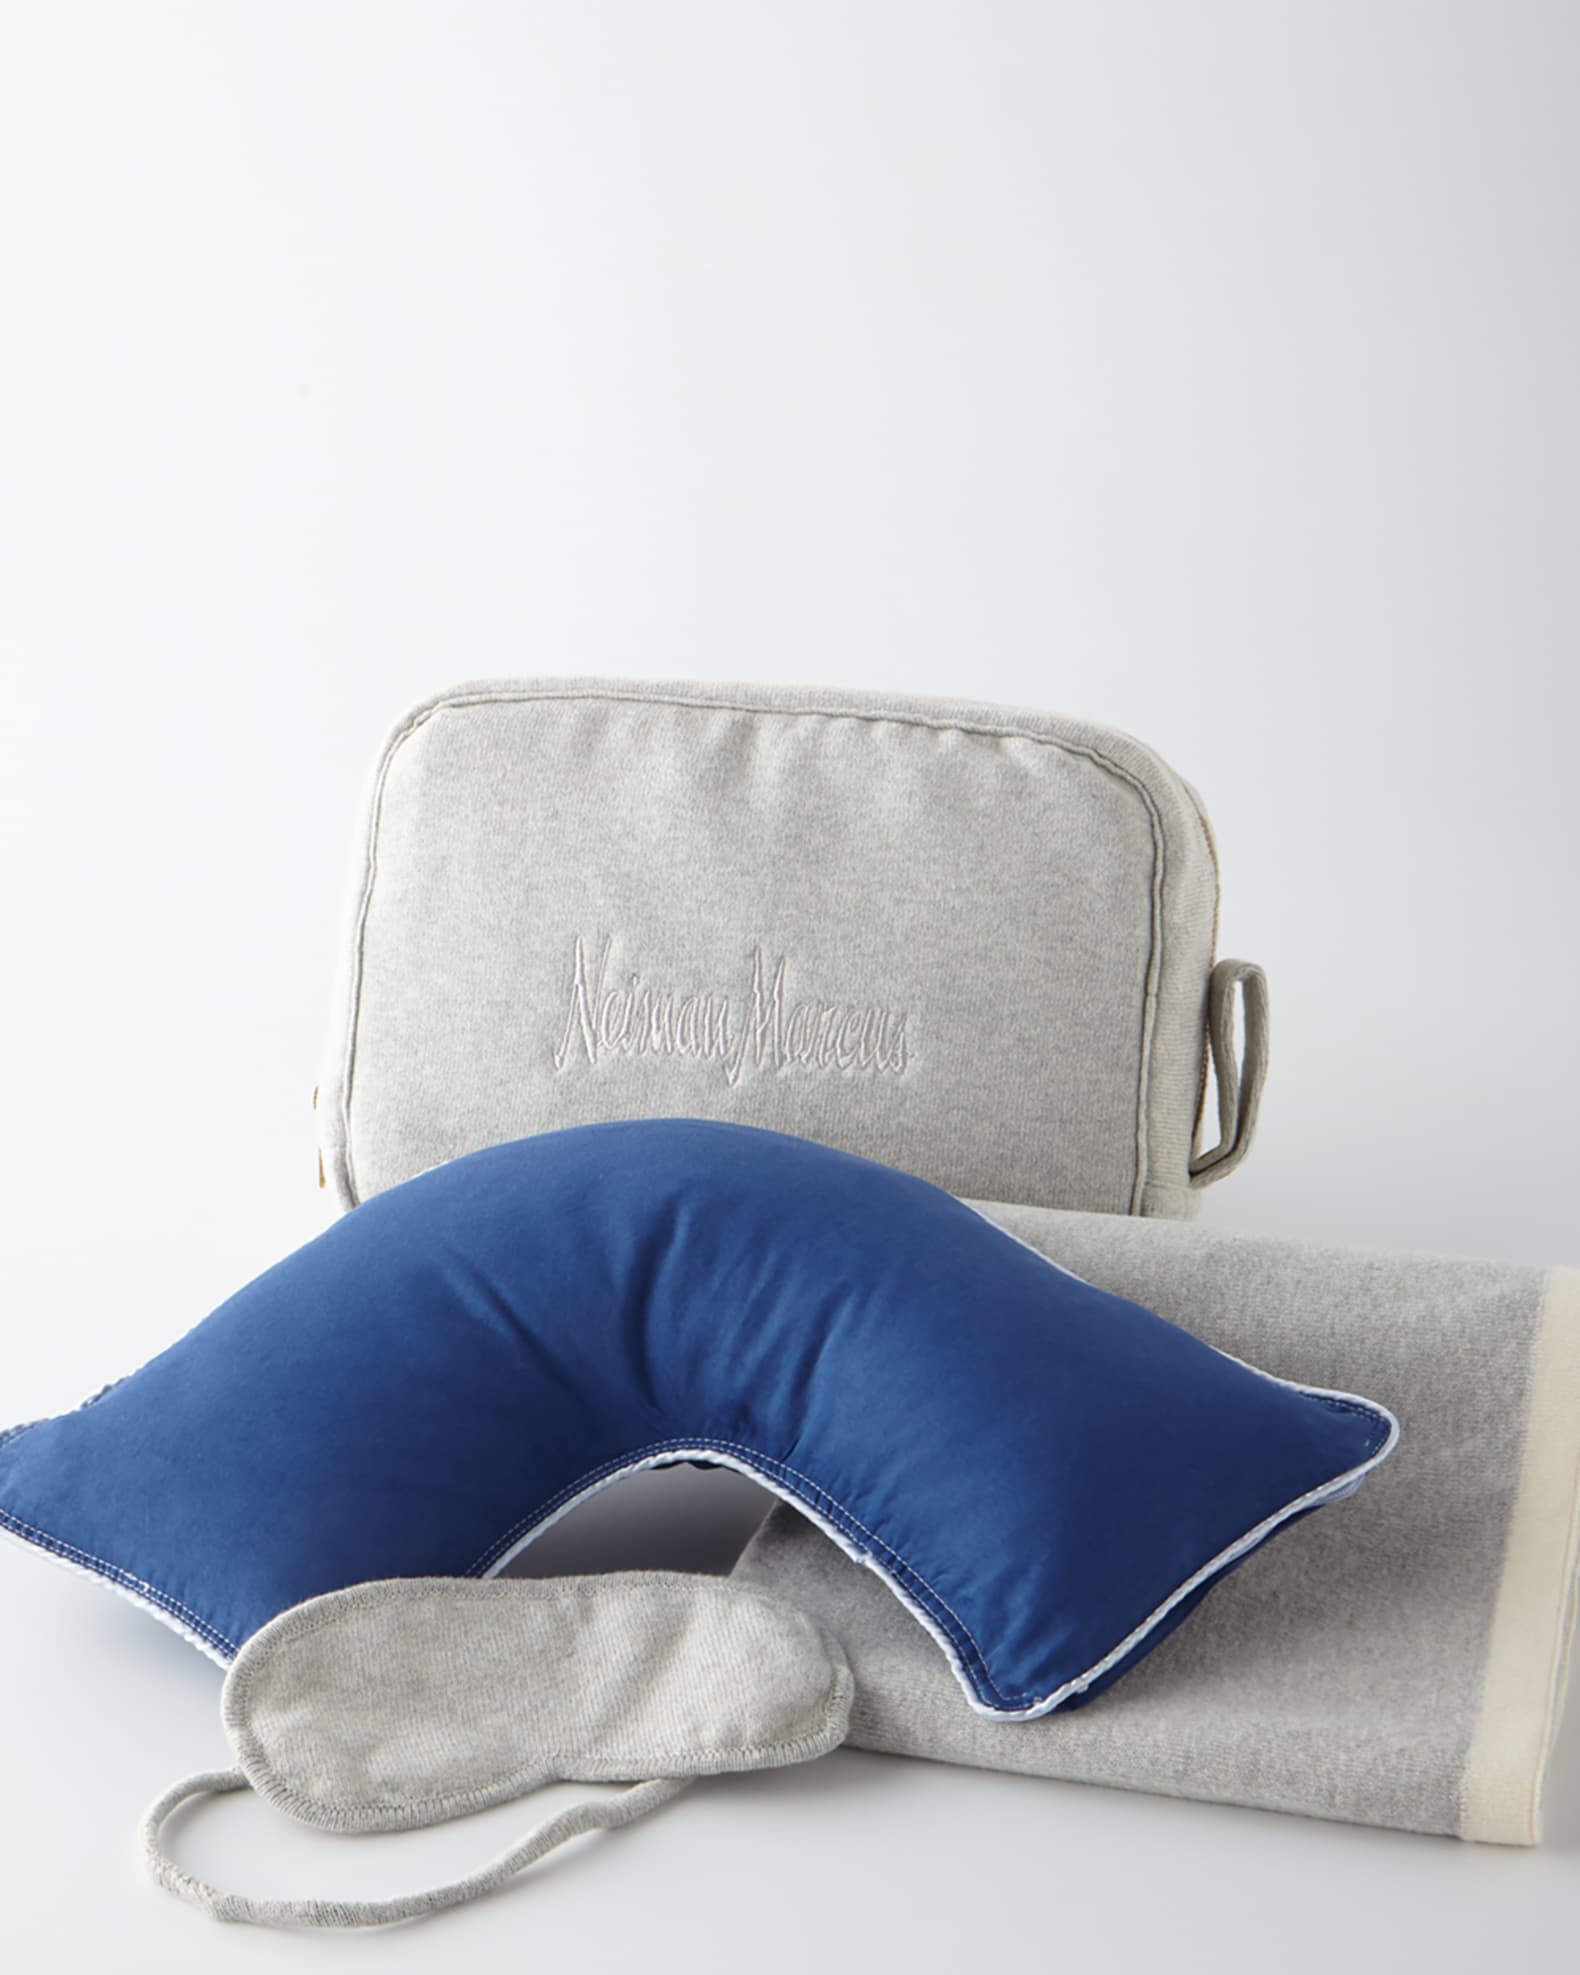 Stay Put Pillow  Your New Favorite Travel Companion!